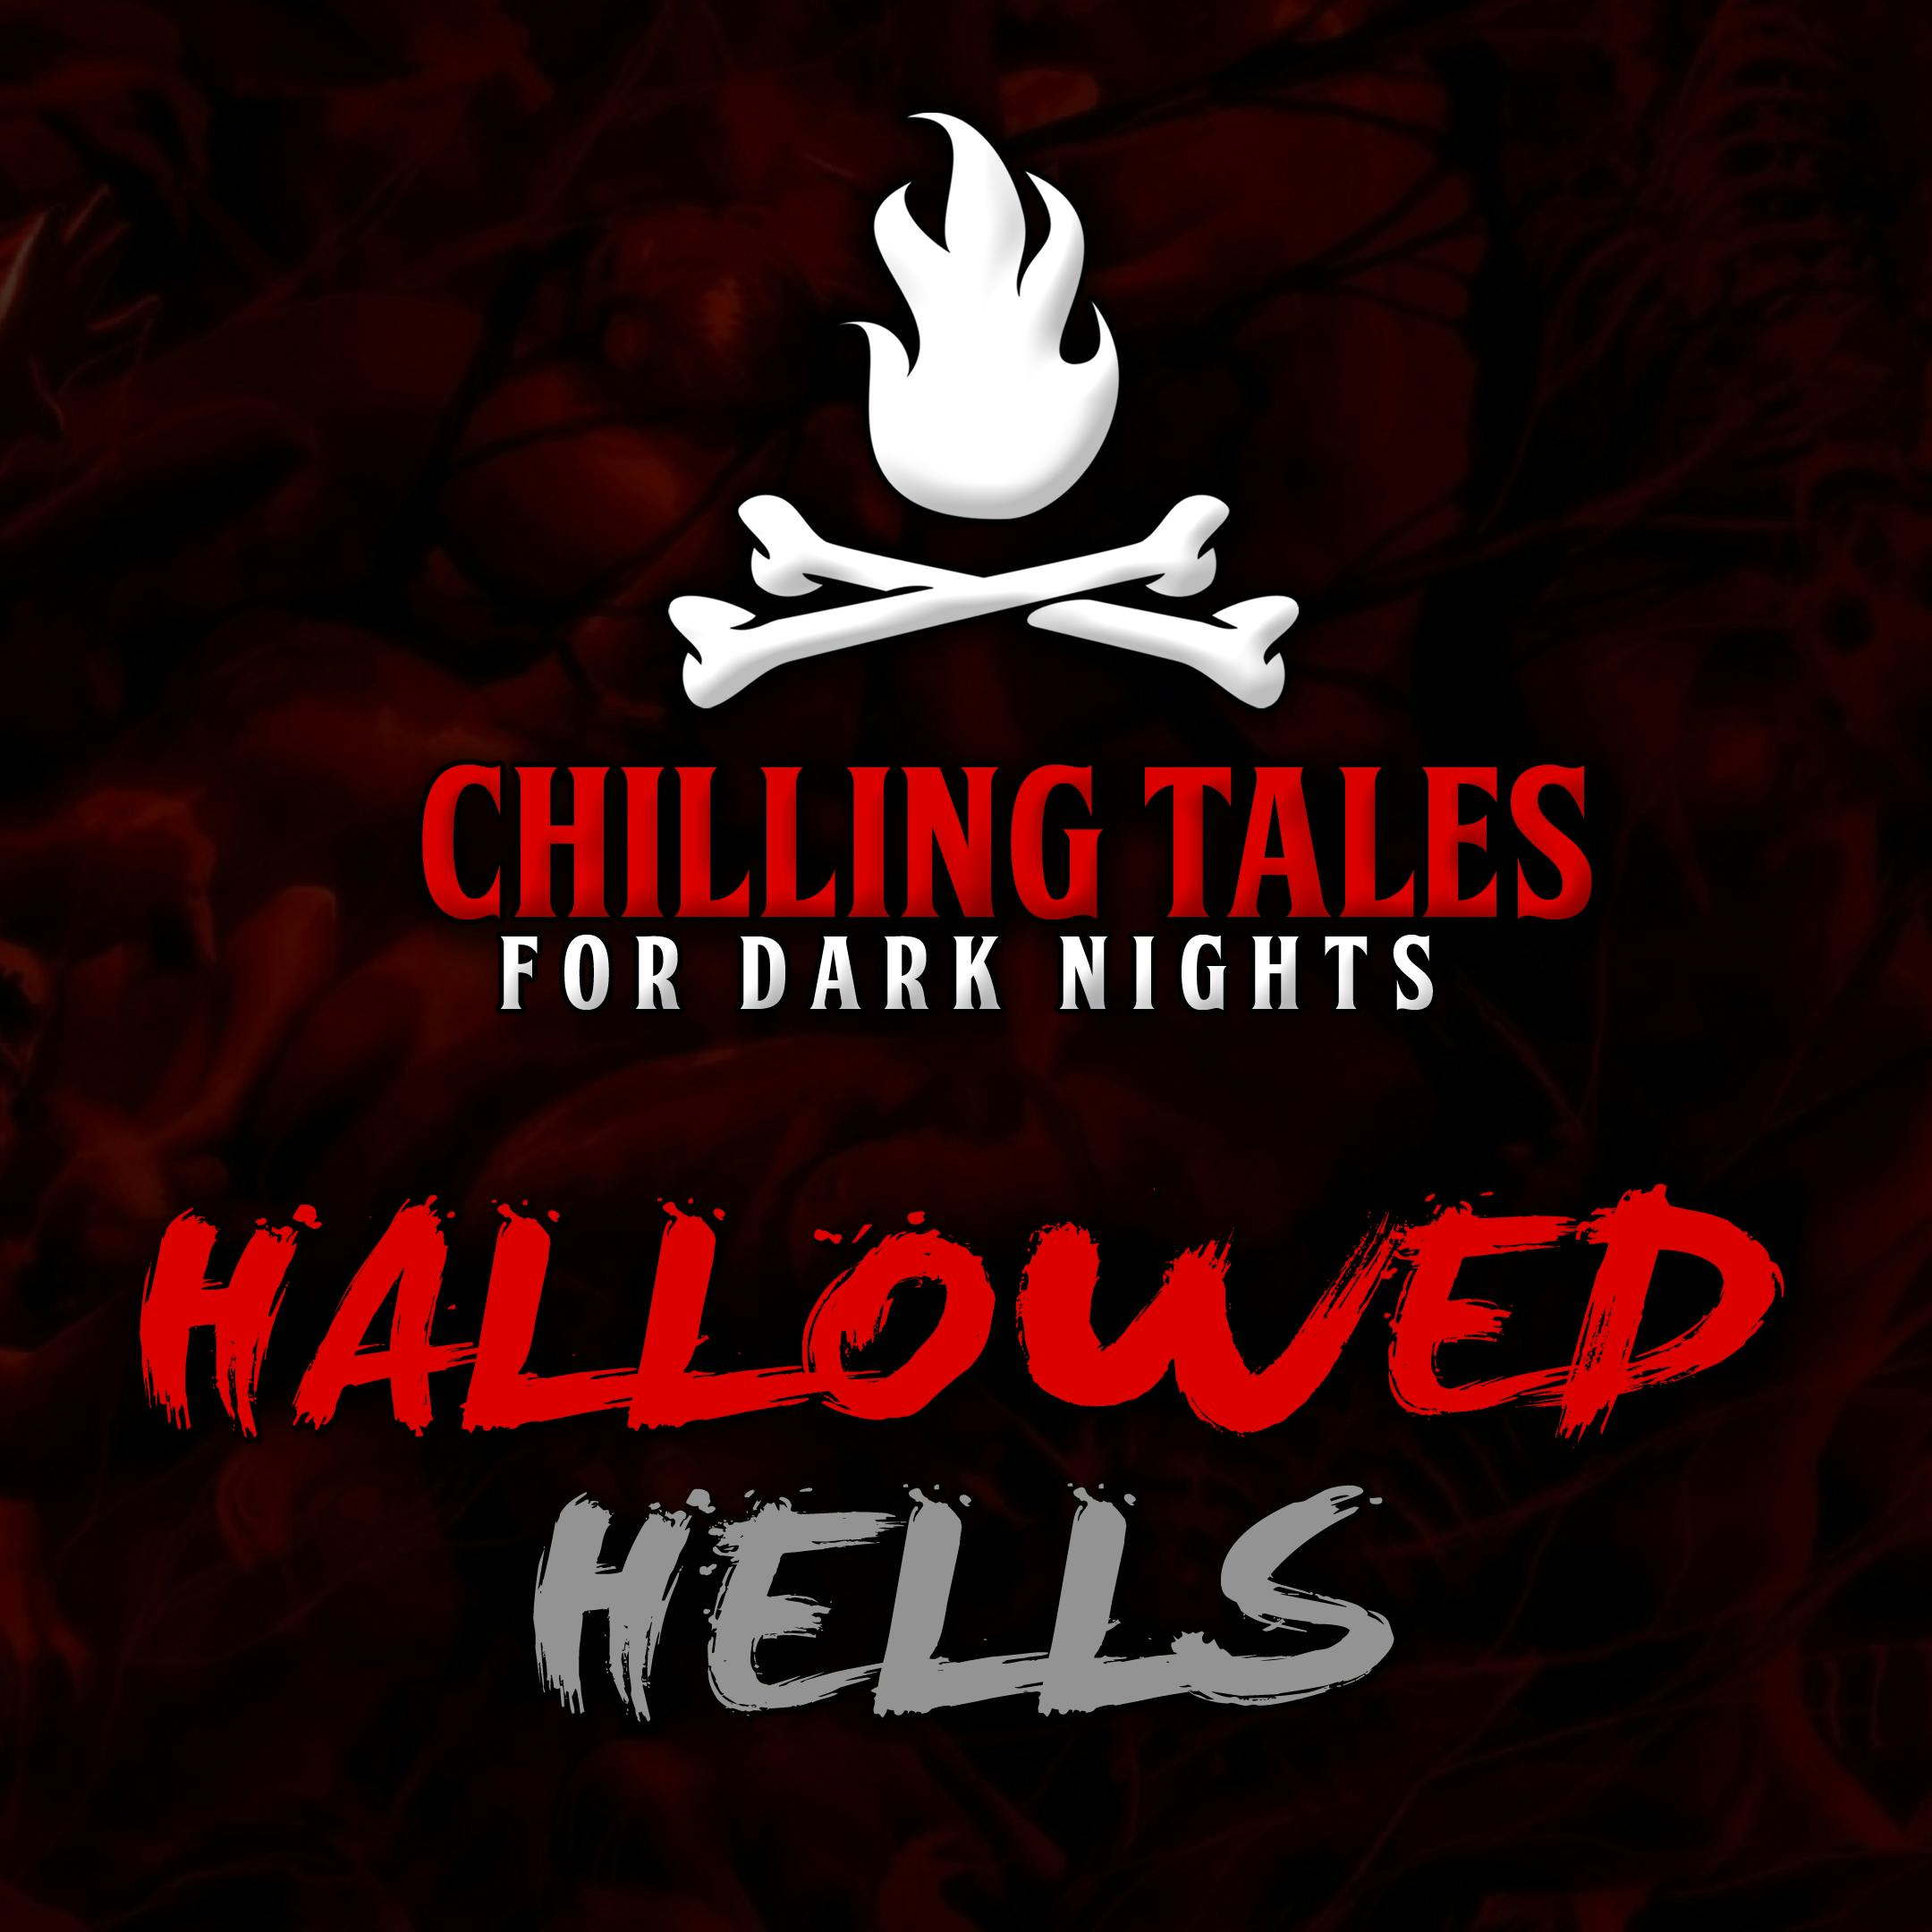 85: Hallowed Hells – Chilling Tales for Dark Nights